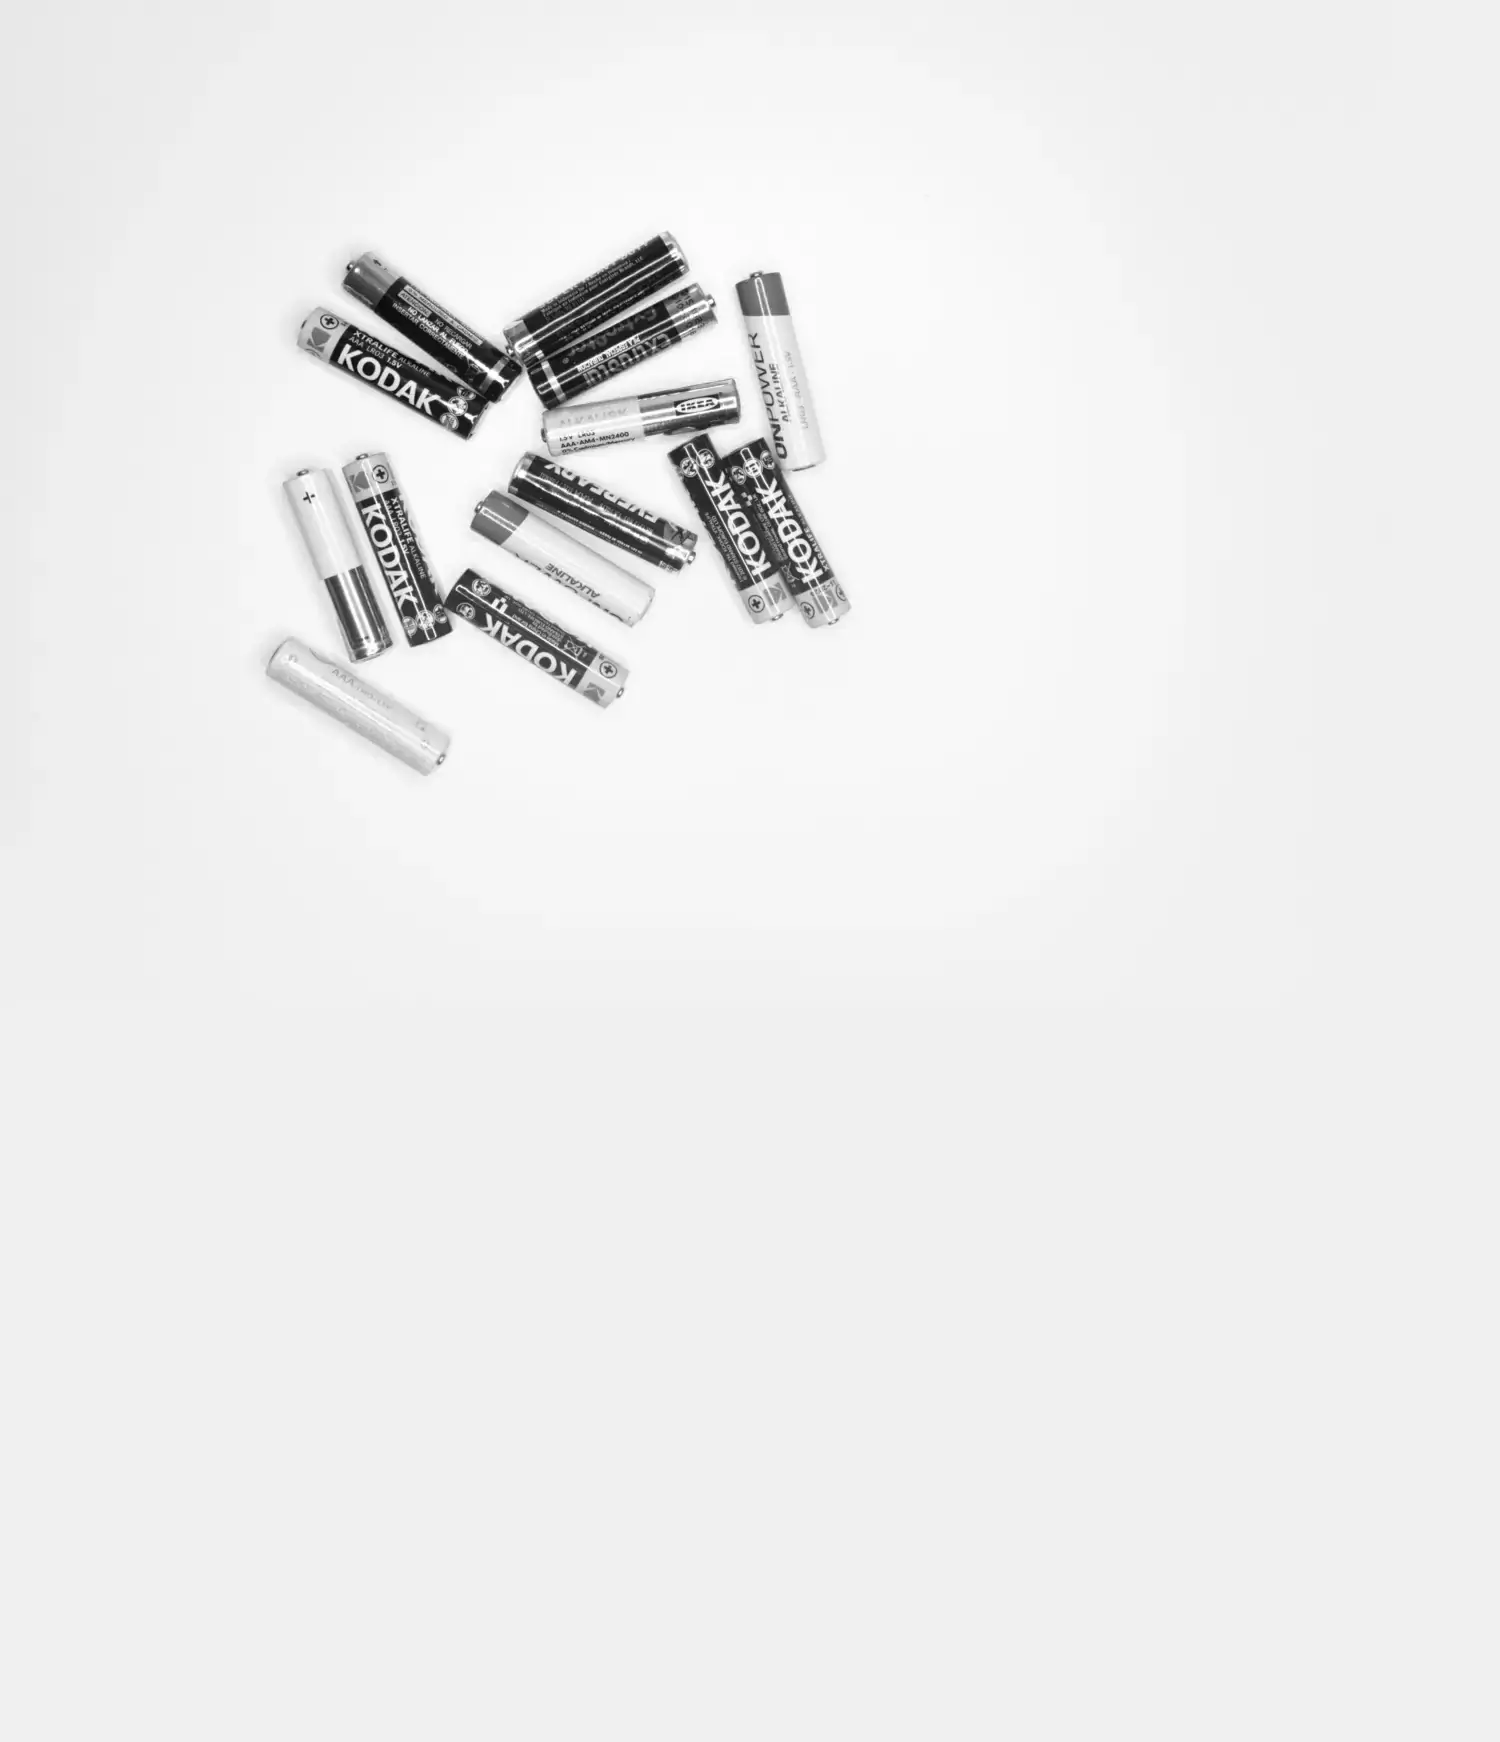 Batteries on a white background